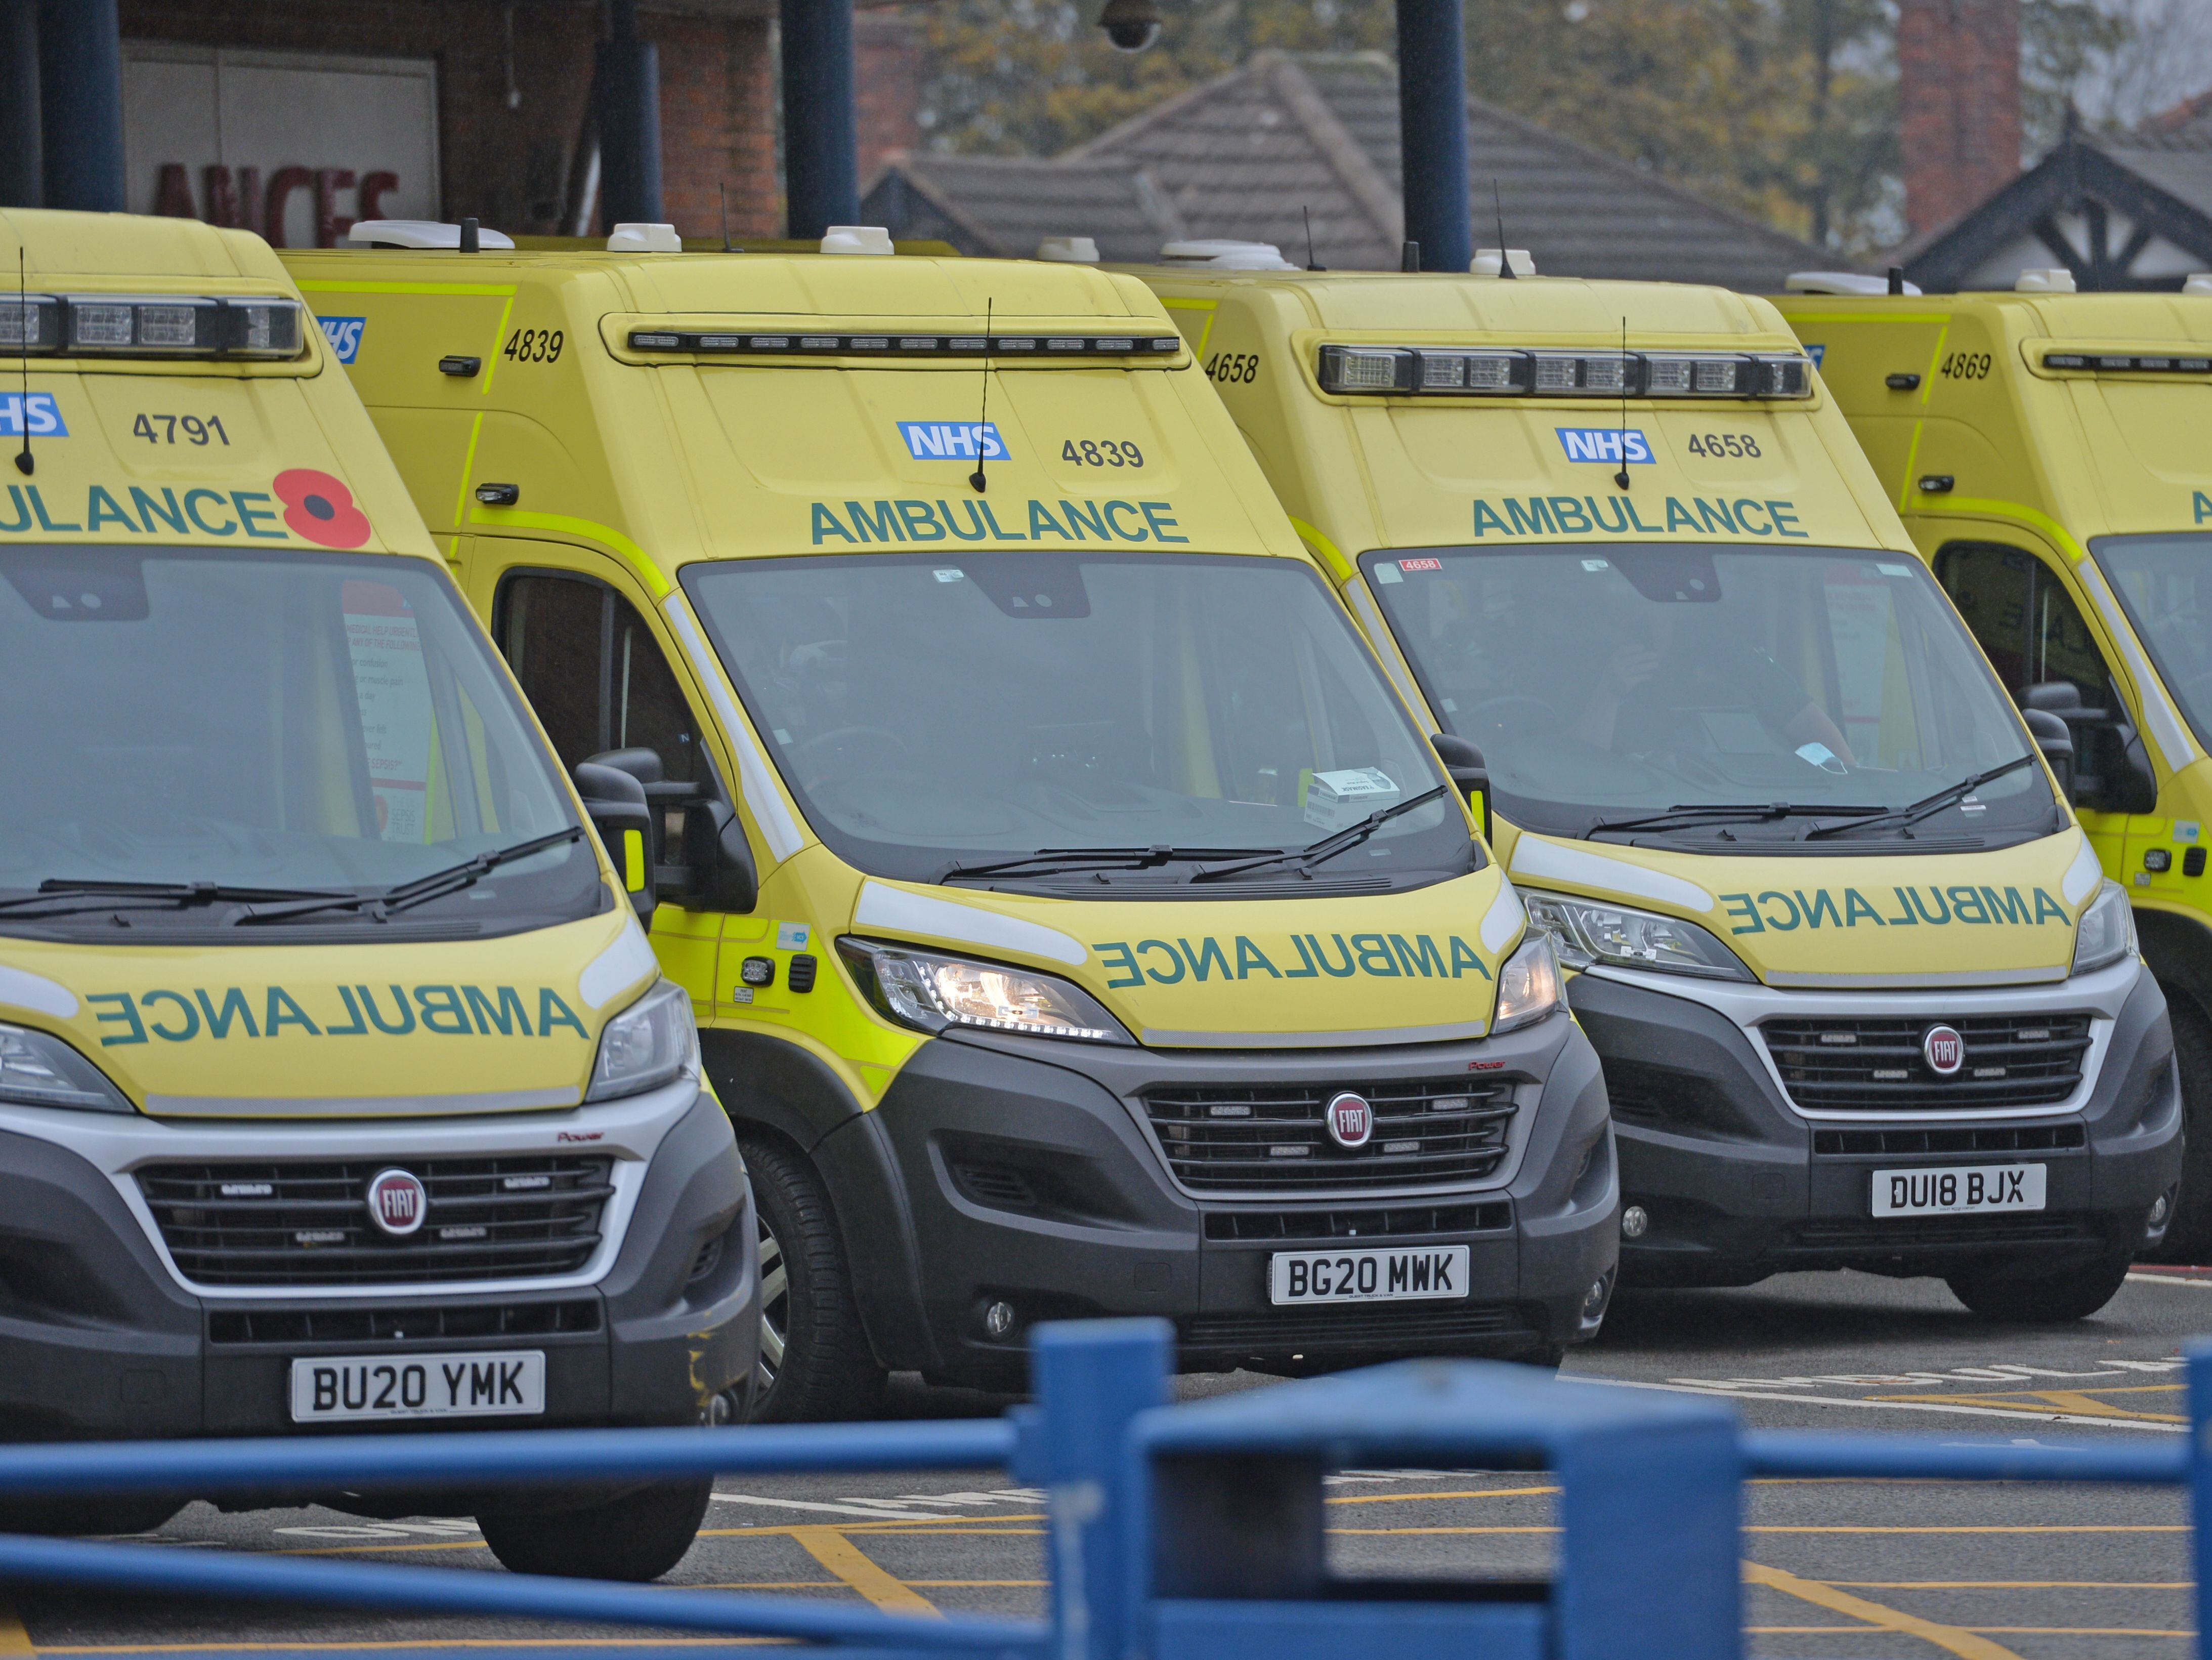 Compliments are up for ambulance workers despite rise in assaults